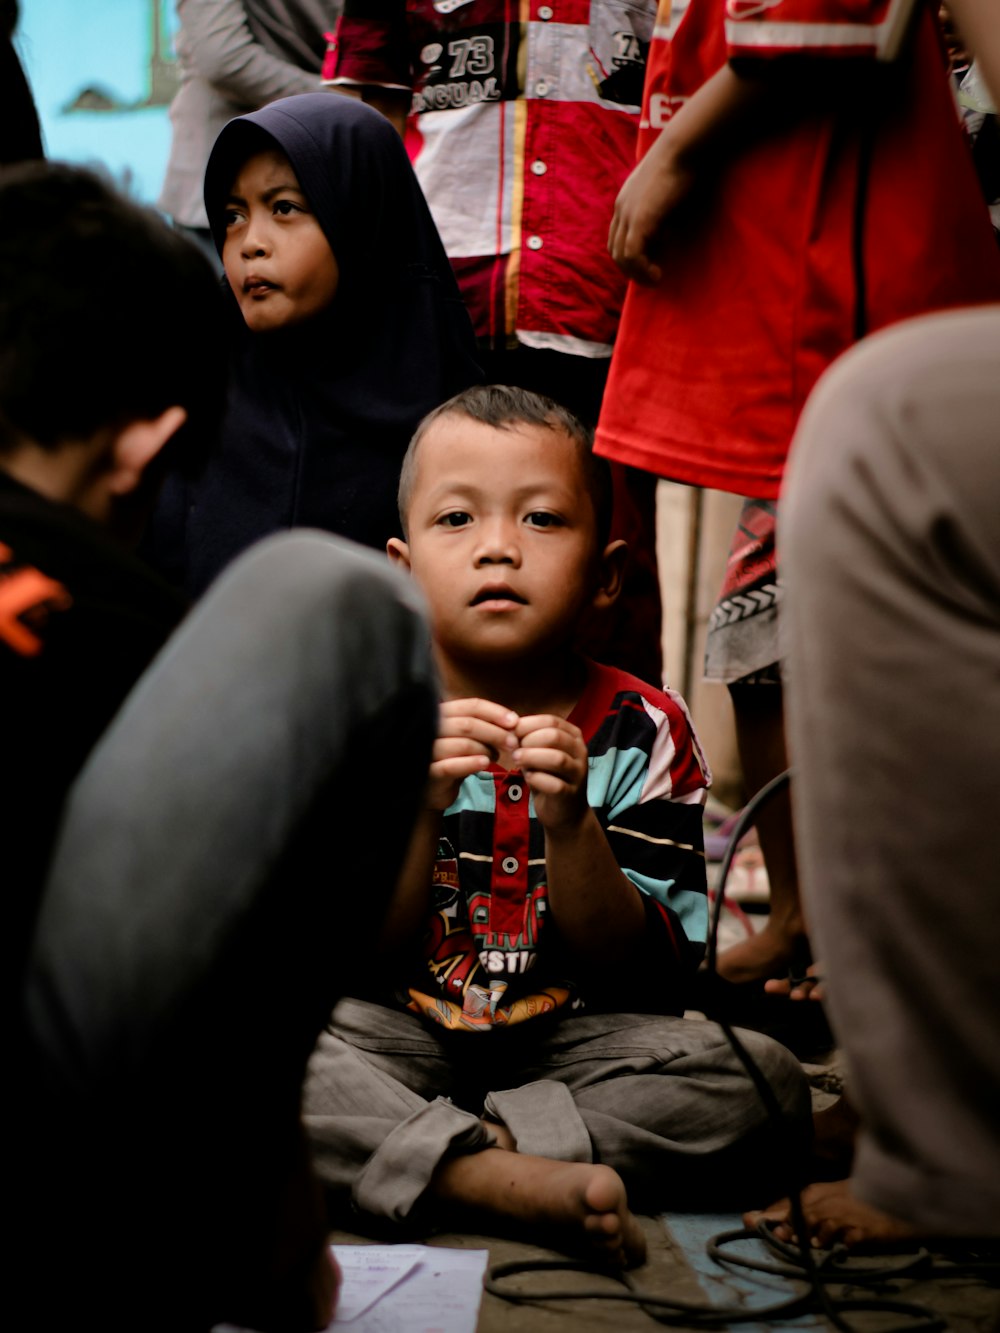 a young boy sitting on the ground in front of a group of people